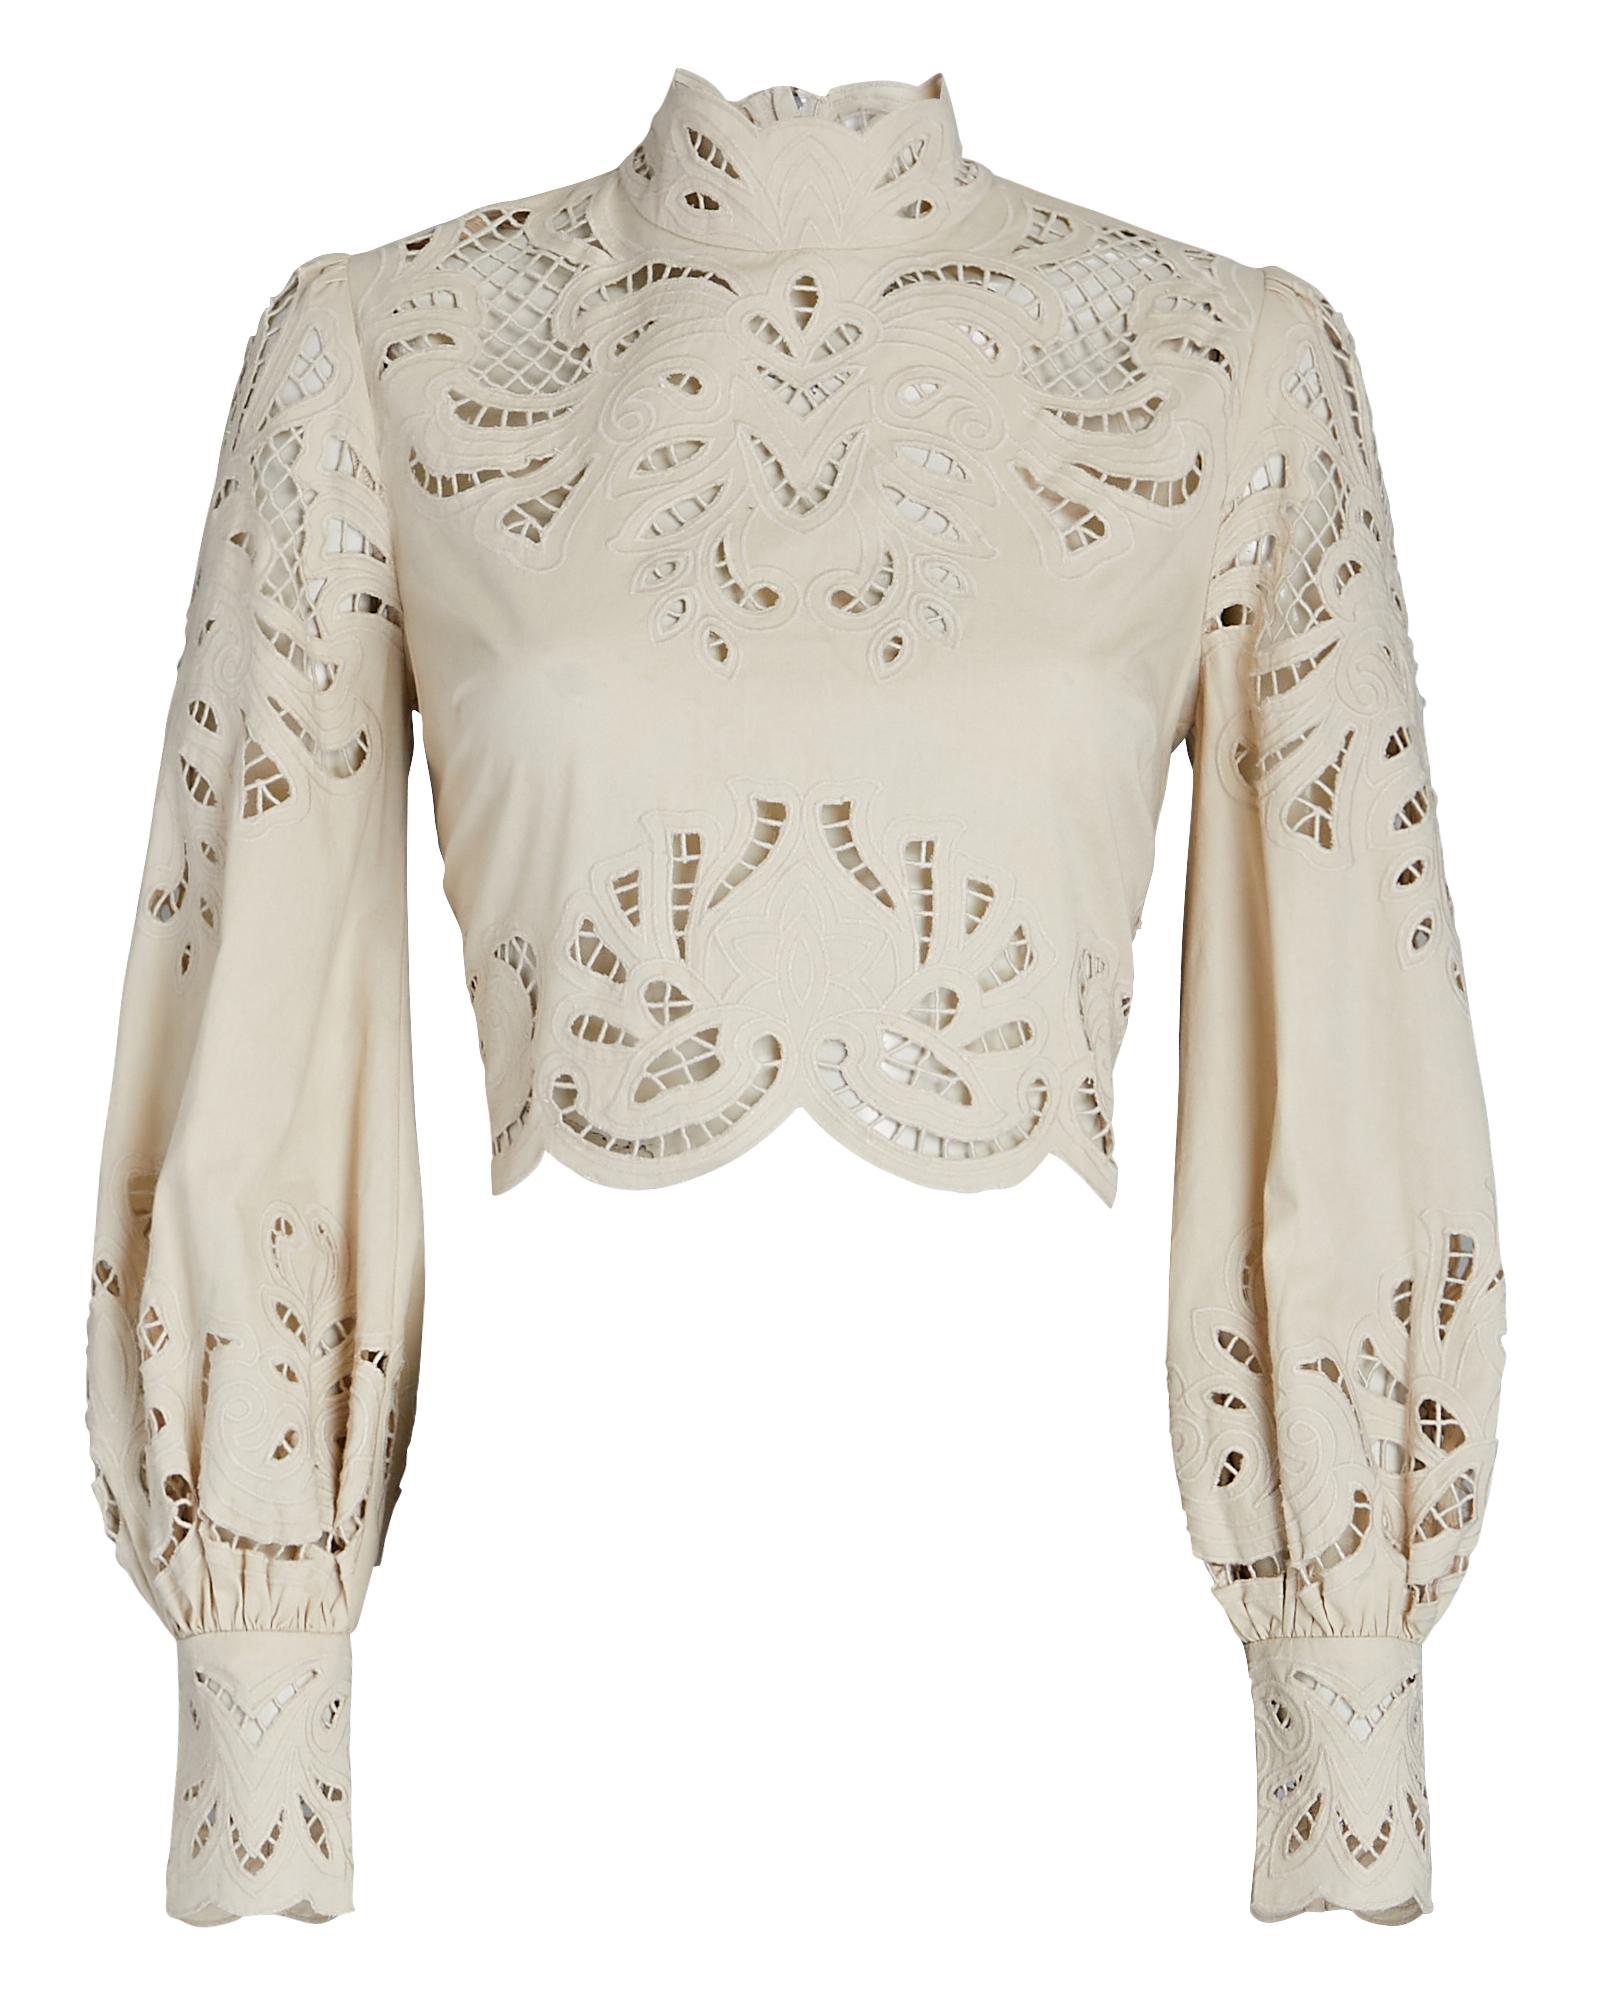 Intermix Jasmine Organic Cotton Lace Blouse in White | Lyst